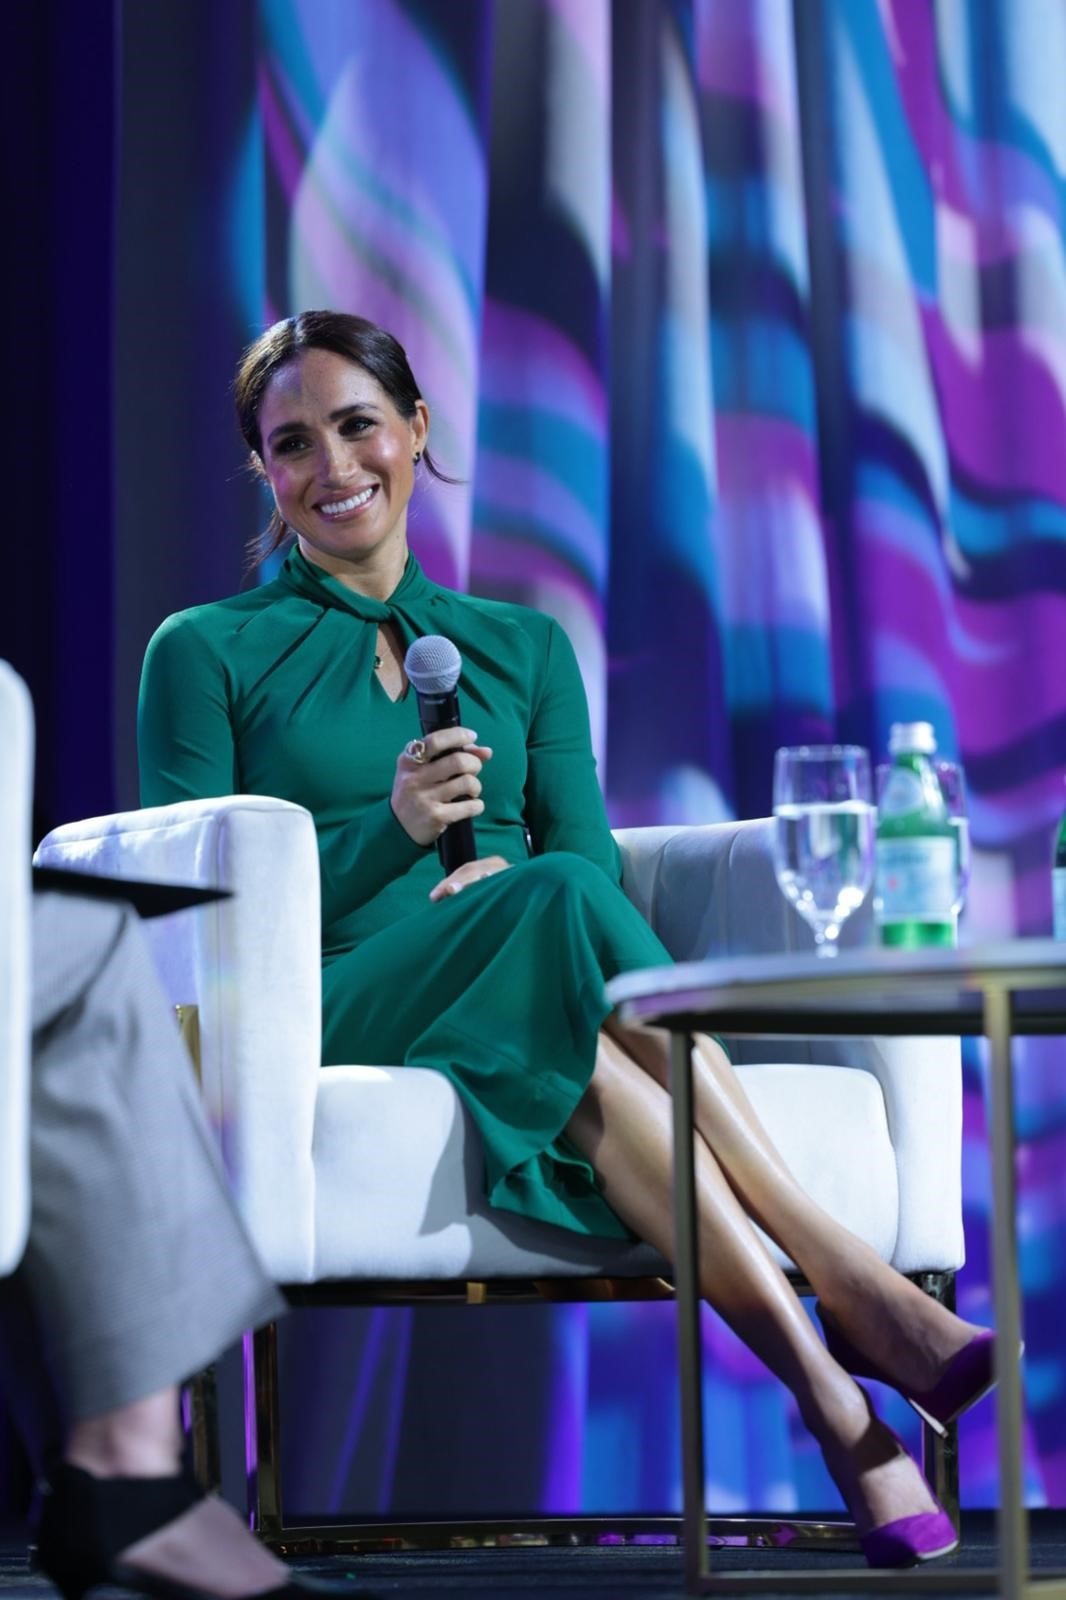 Duchess of Sussex attends women’s empowerment fundraiser in Indiana ...